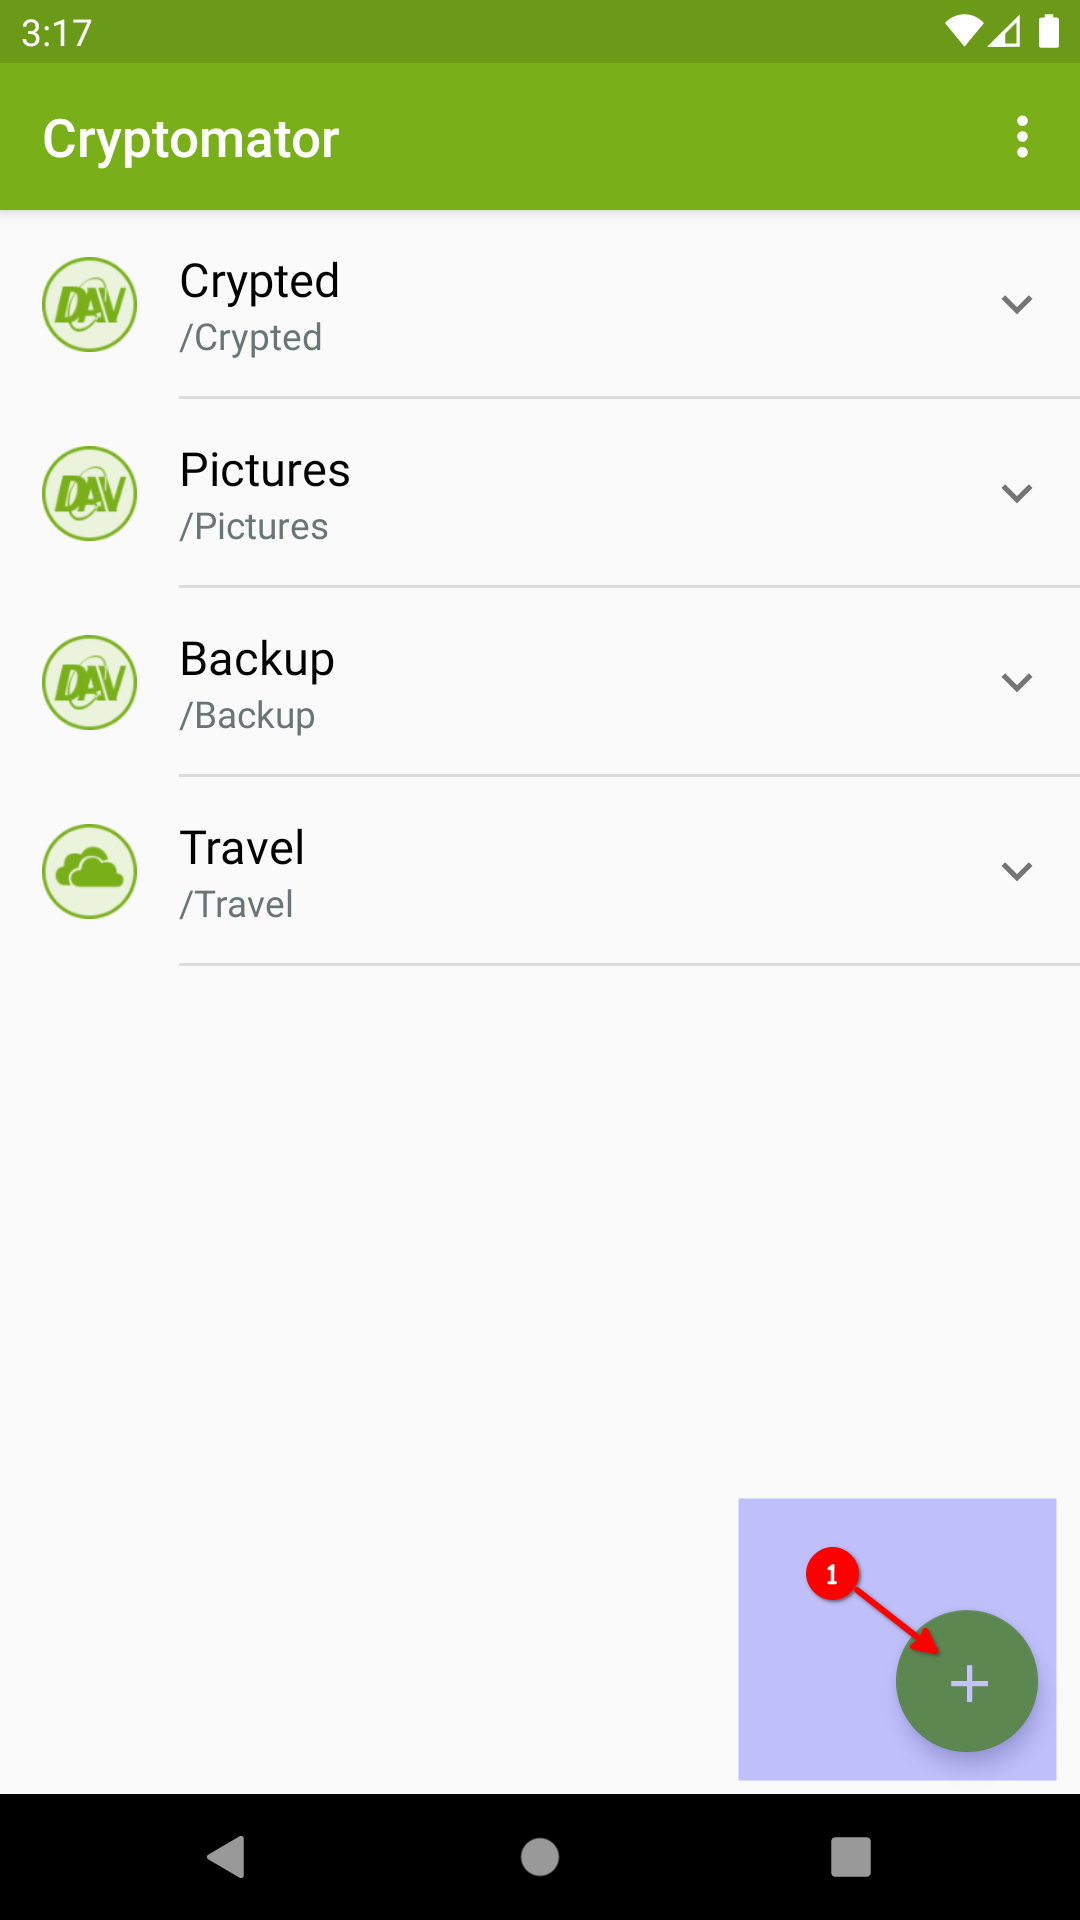 How to add a vault with Android